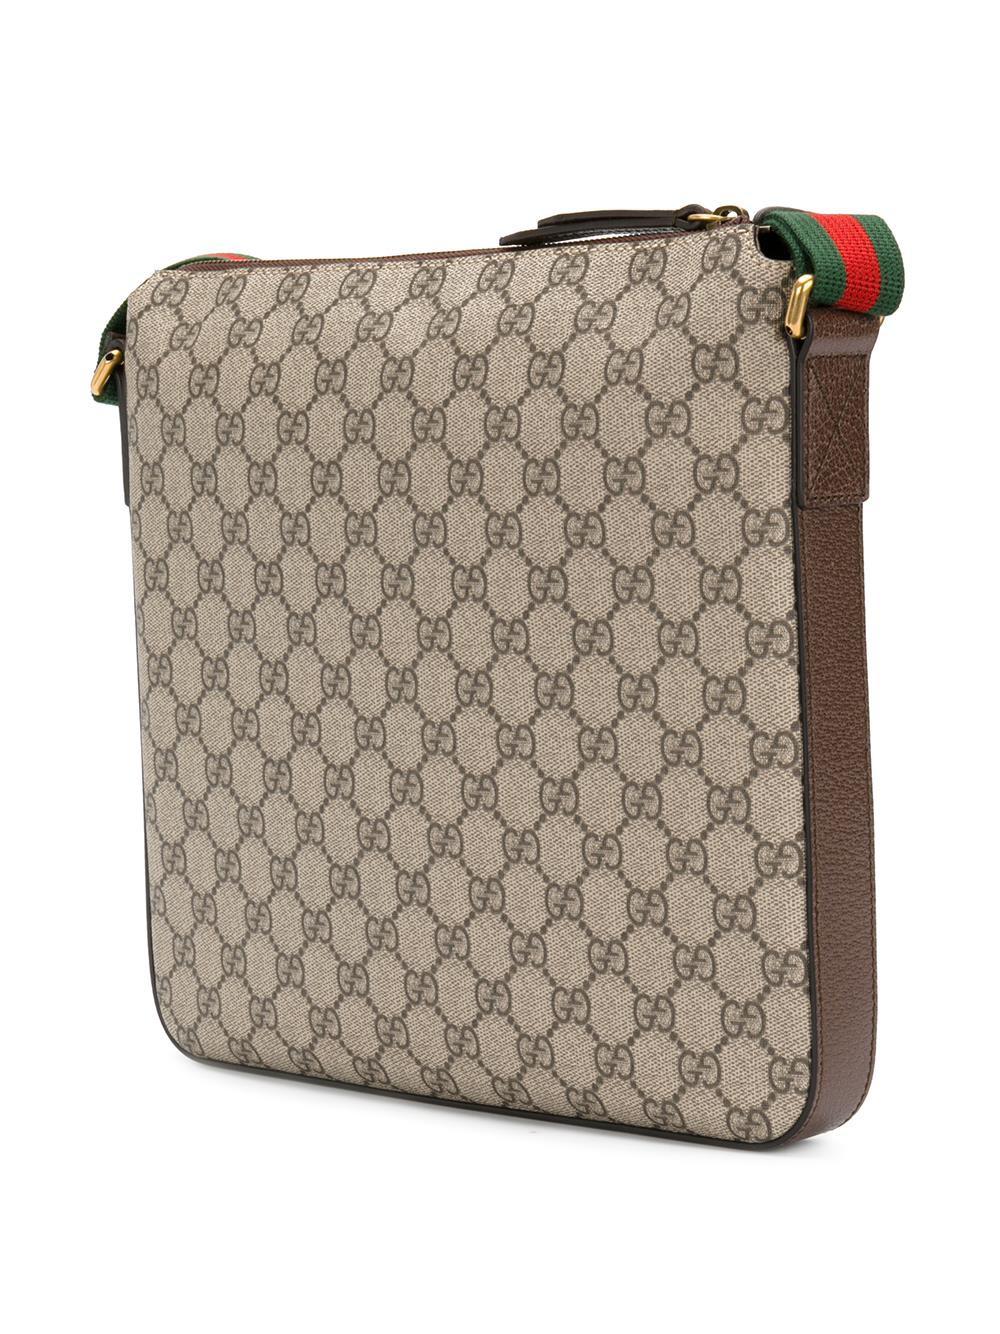 Gucci Canvas Courrier Soft Gg Supreme Crossbody Bag for Men - Lyst